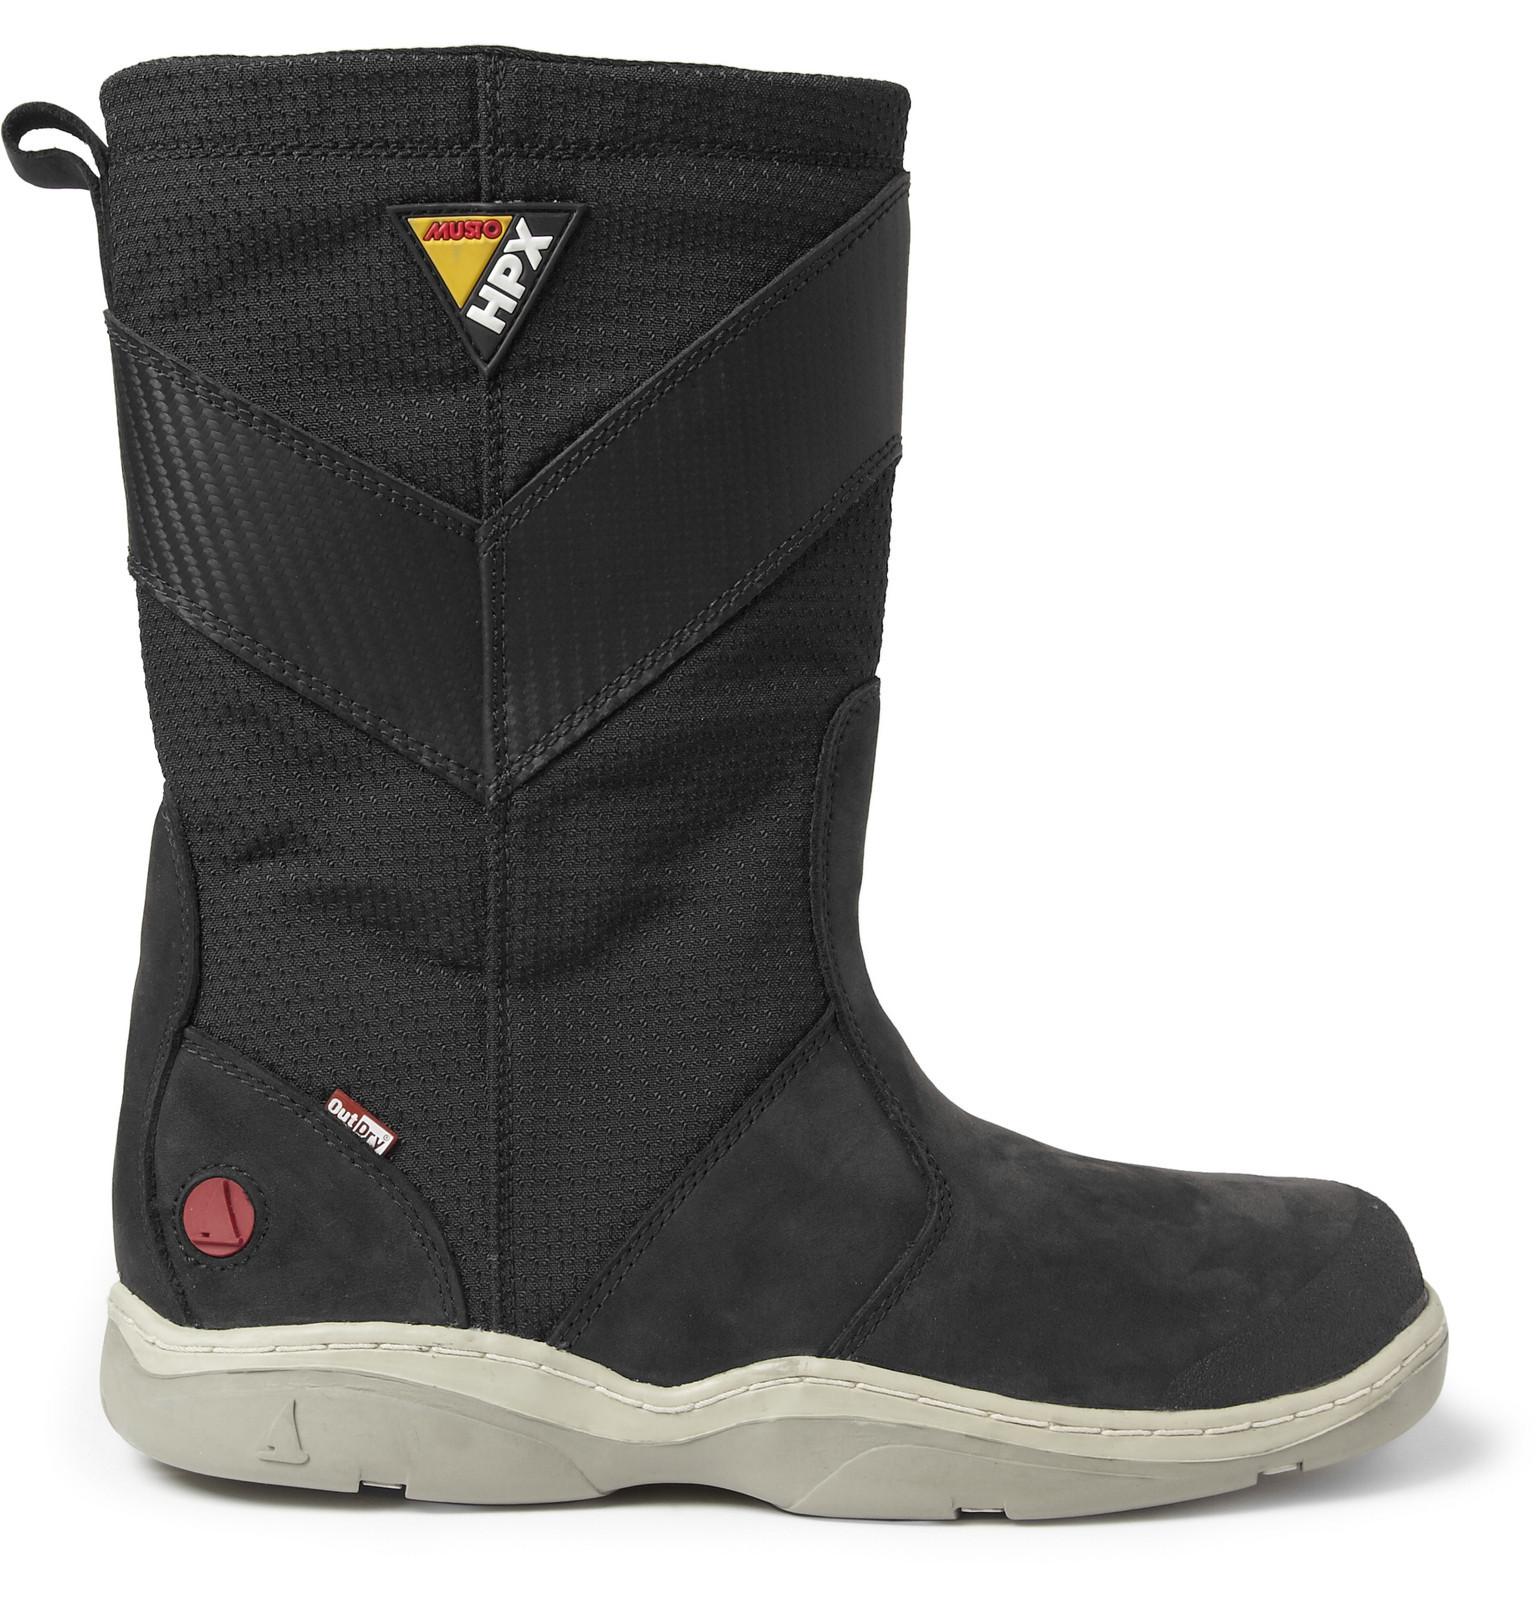 Lyst - Musto Sailing Hpx Leather And Canvas Boots in Black for Men